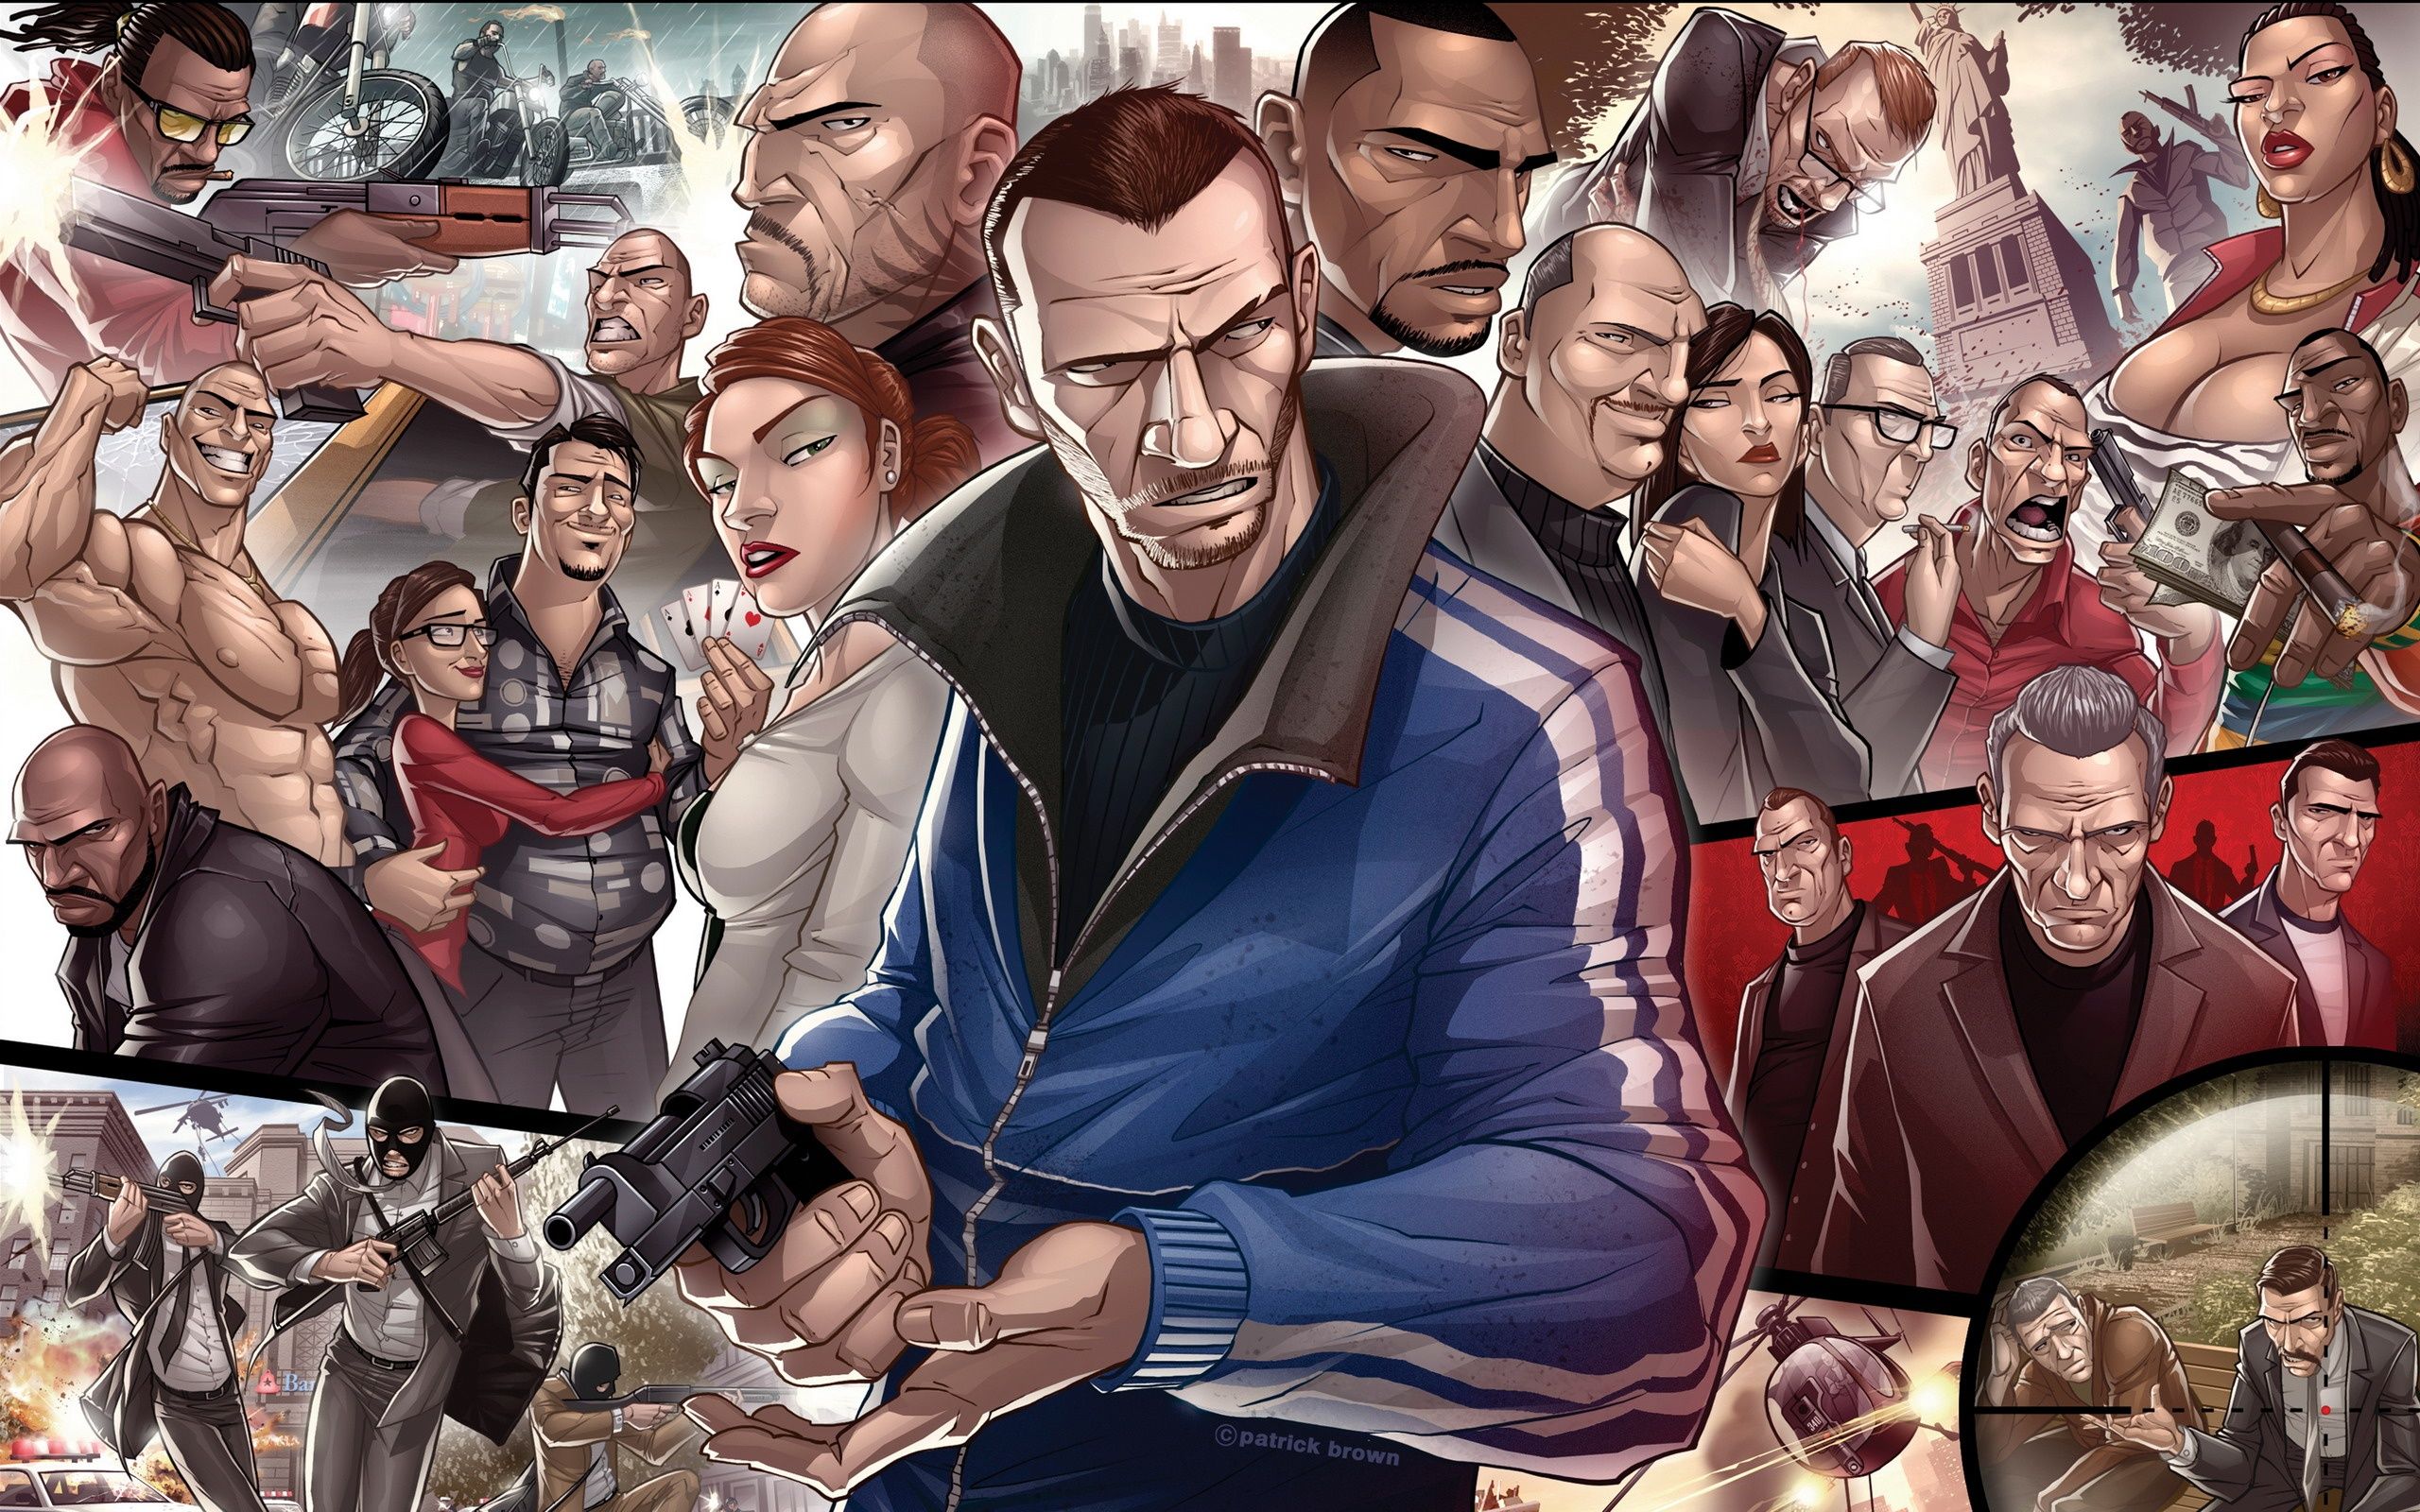 Grand Theft Auto IV Characters Wallpaper in jpg format for free download